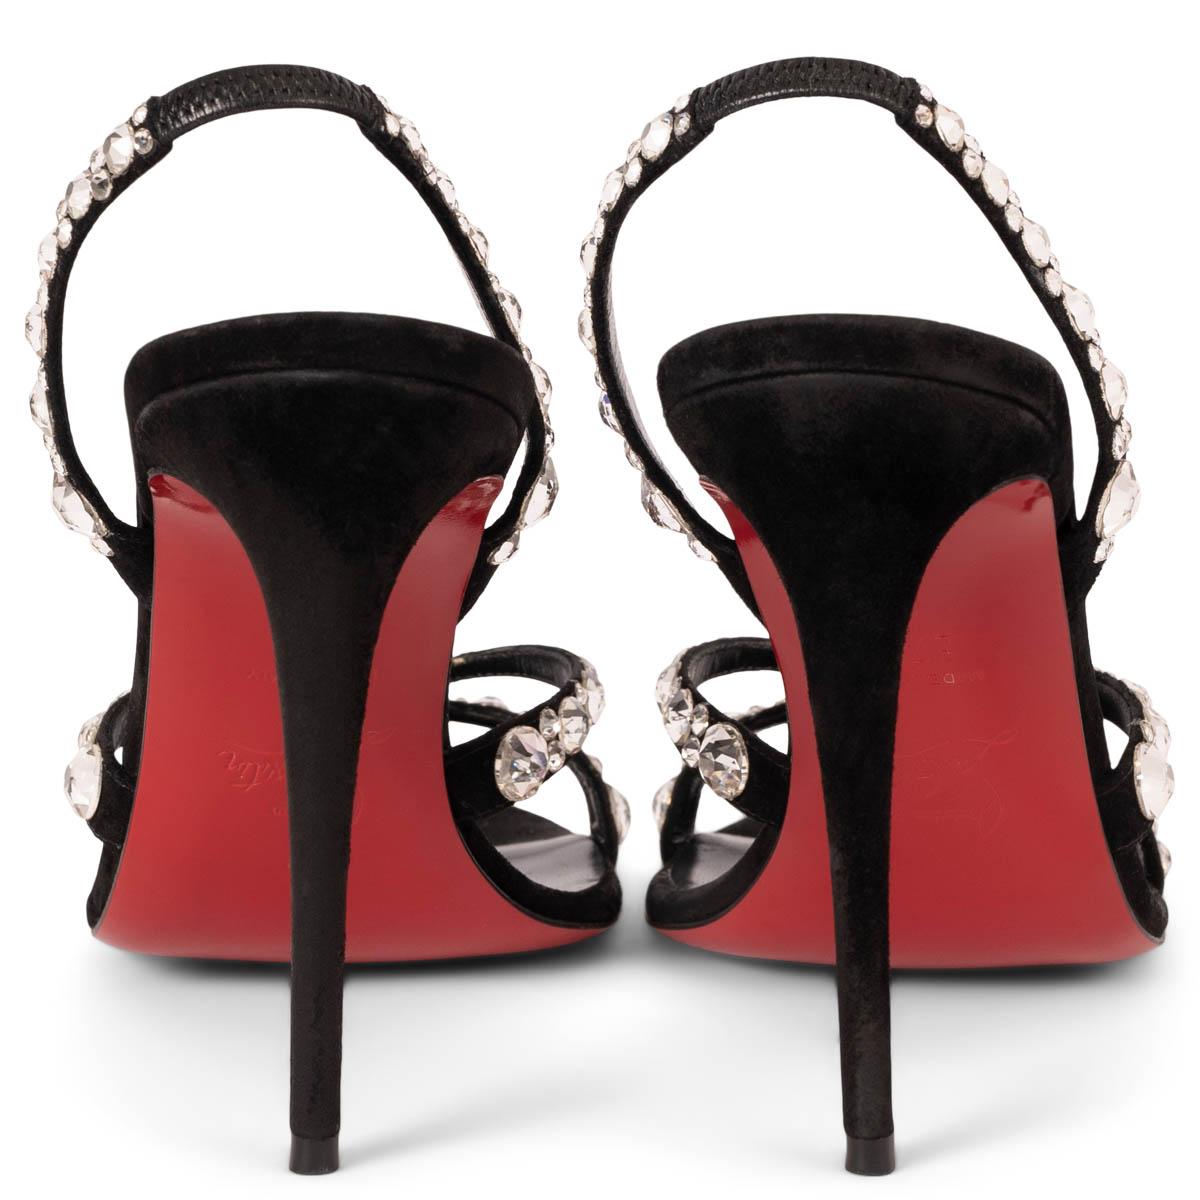 CHRISTIAN LOUBOUTIN black suede EMILIE STRASS 100 Sandals Shoes 37.5 For Sale 1